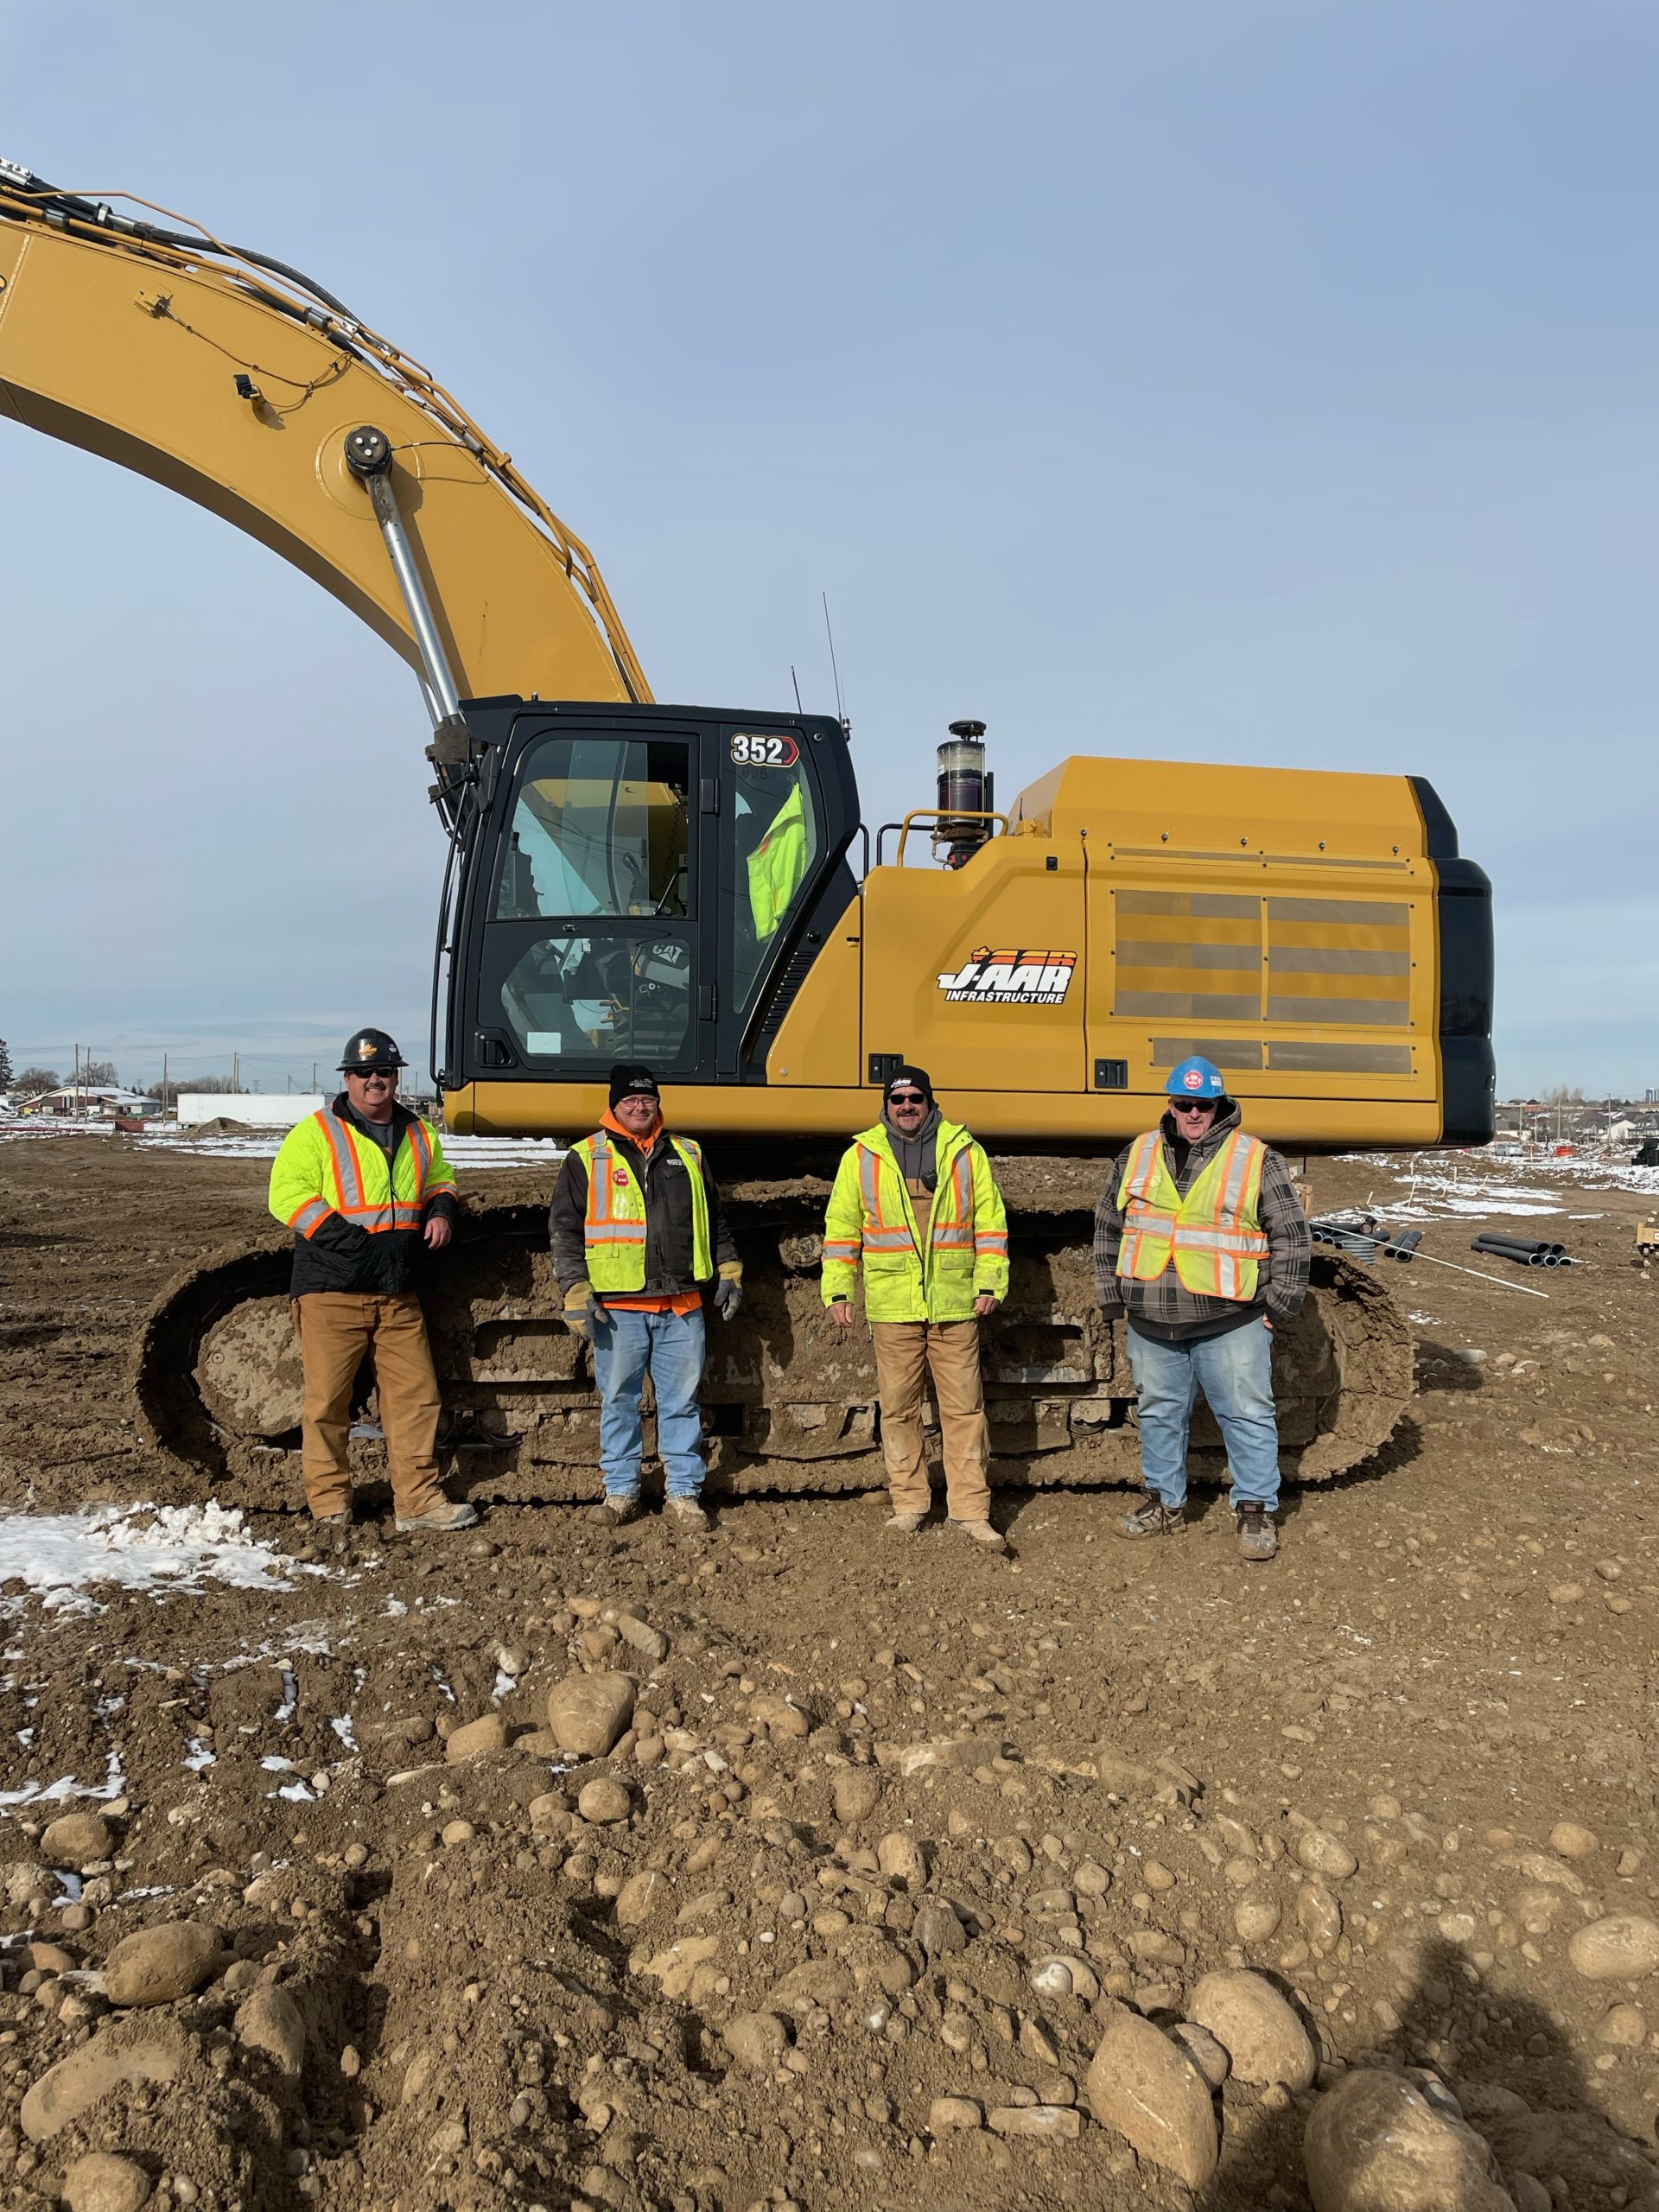 Local 793 members Steve Wilson, Kevin Carruthers, Dan Jacques and Lee Carvalho with a CAT 352 excavator